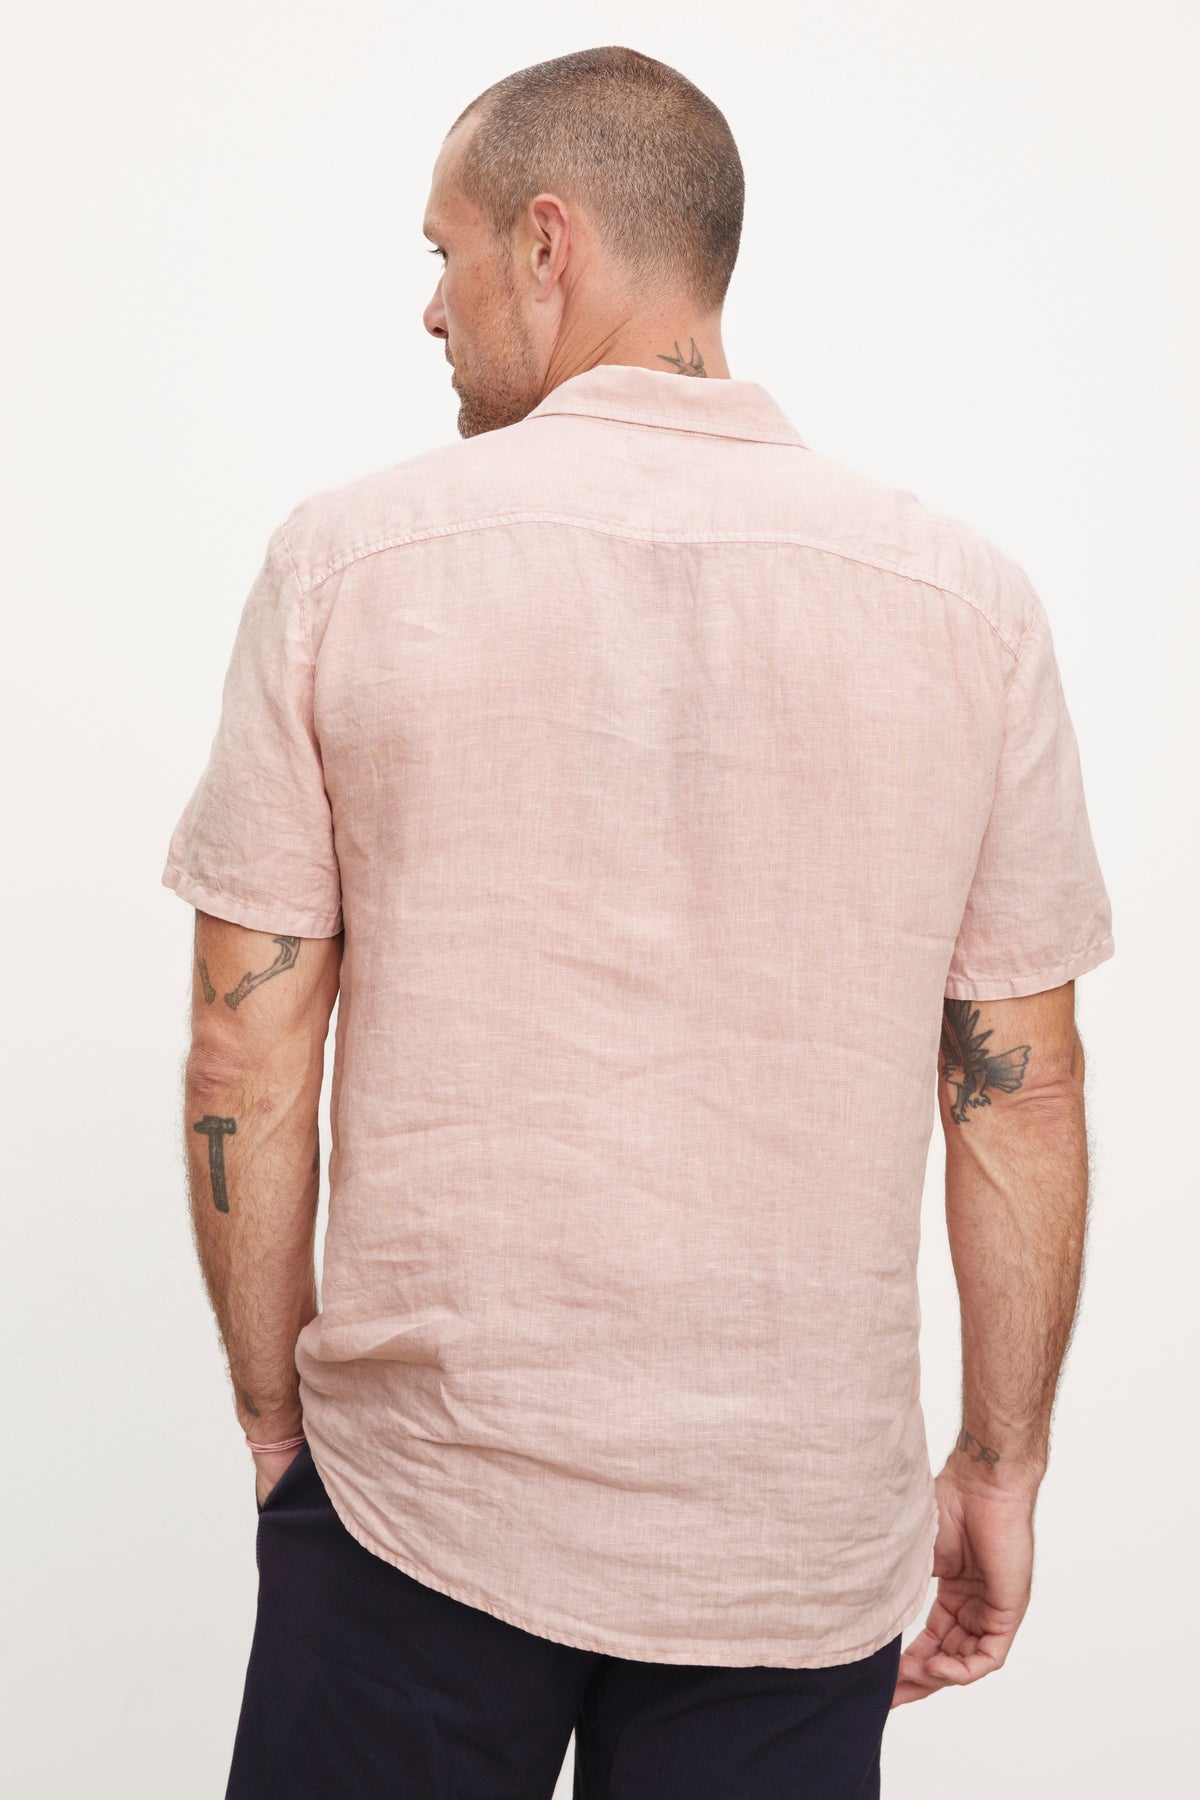 A man viewed from behind, wearing a Velvet by Graham & Spencer MACKIE LINEN BUTTON-UP SHIRT and dark pants, displaying visible tattoos on his arms.-36753539694785